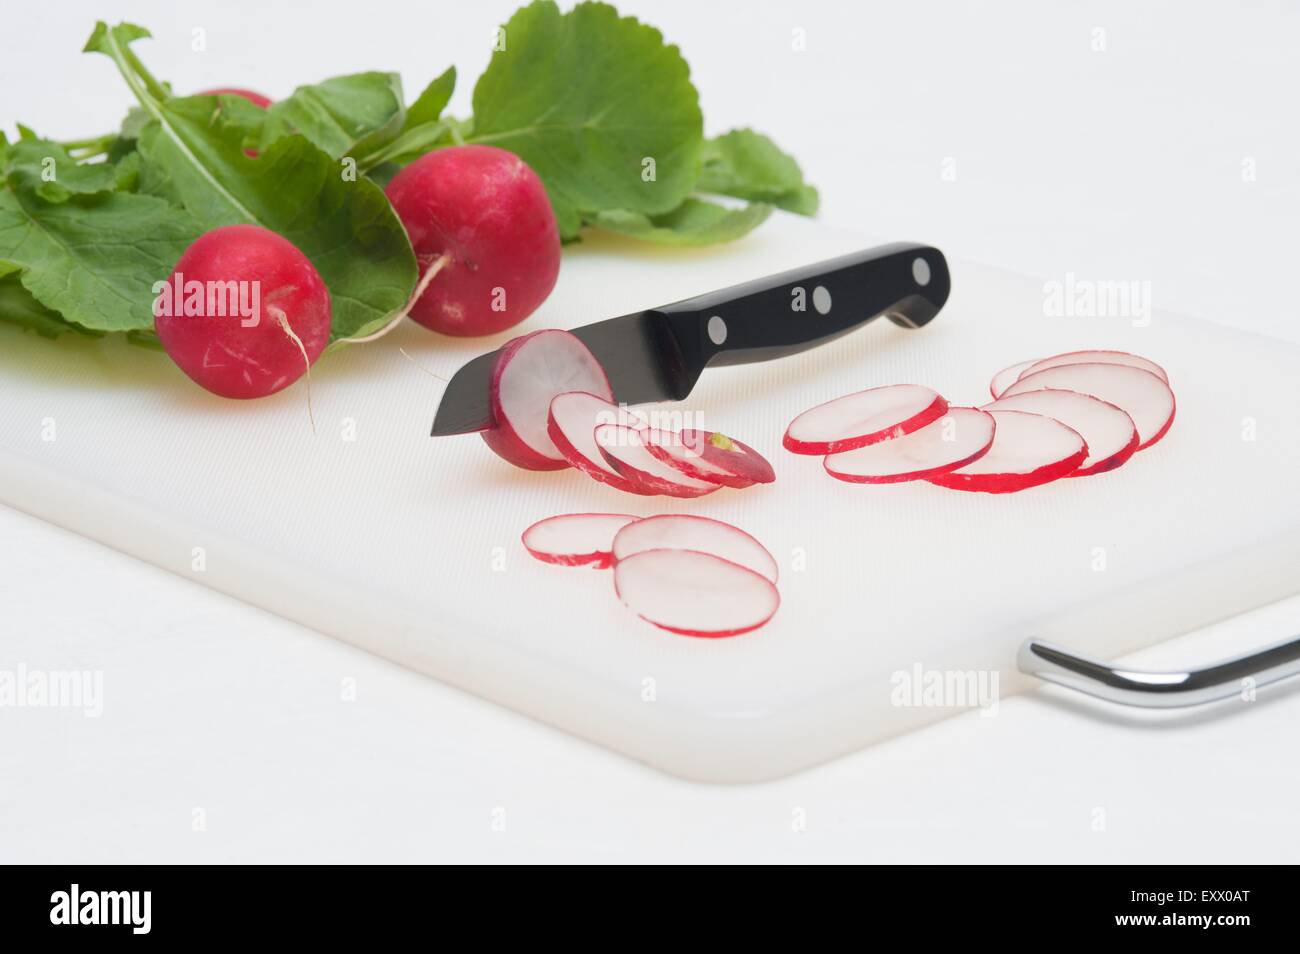 https://c8.alamy.com/comp/EXX0AT/chopping-board-with-kitchen-knife-and-radish-EXX0AT.jpg